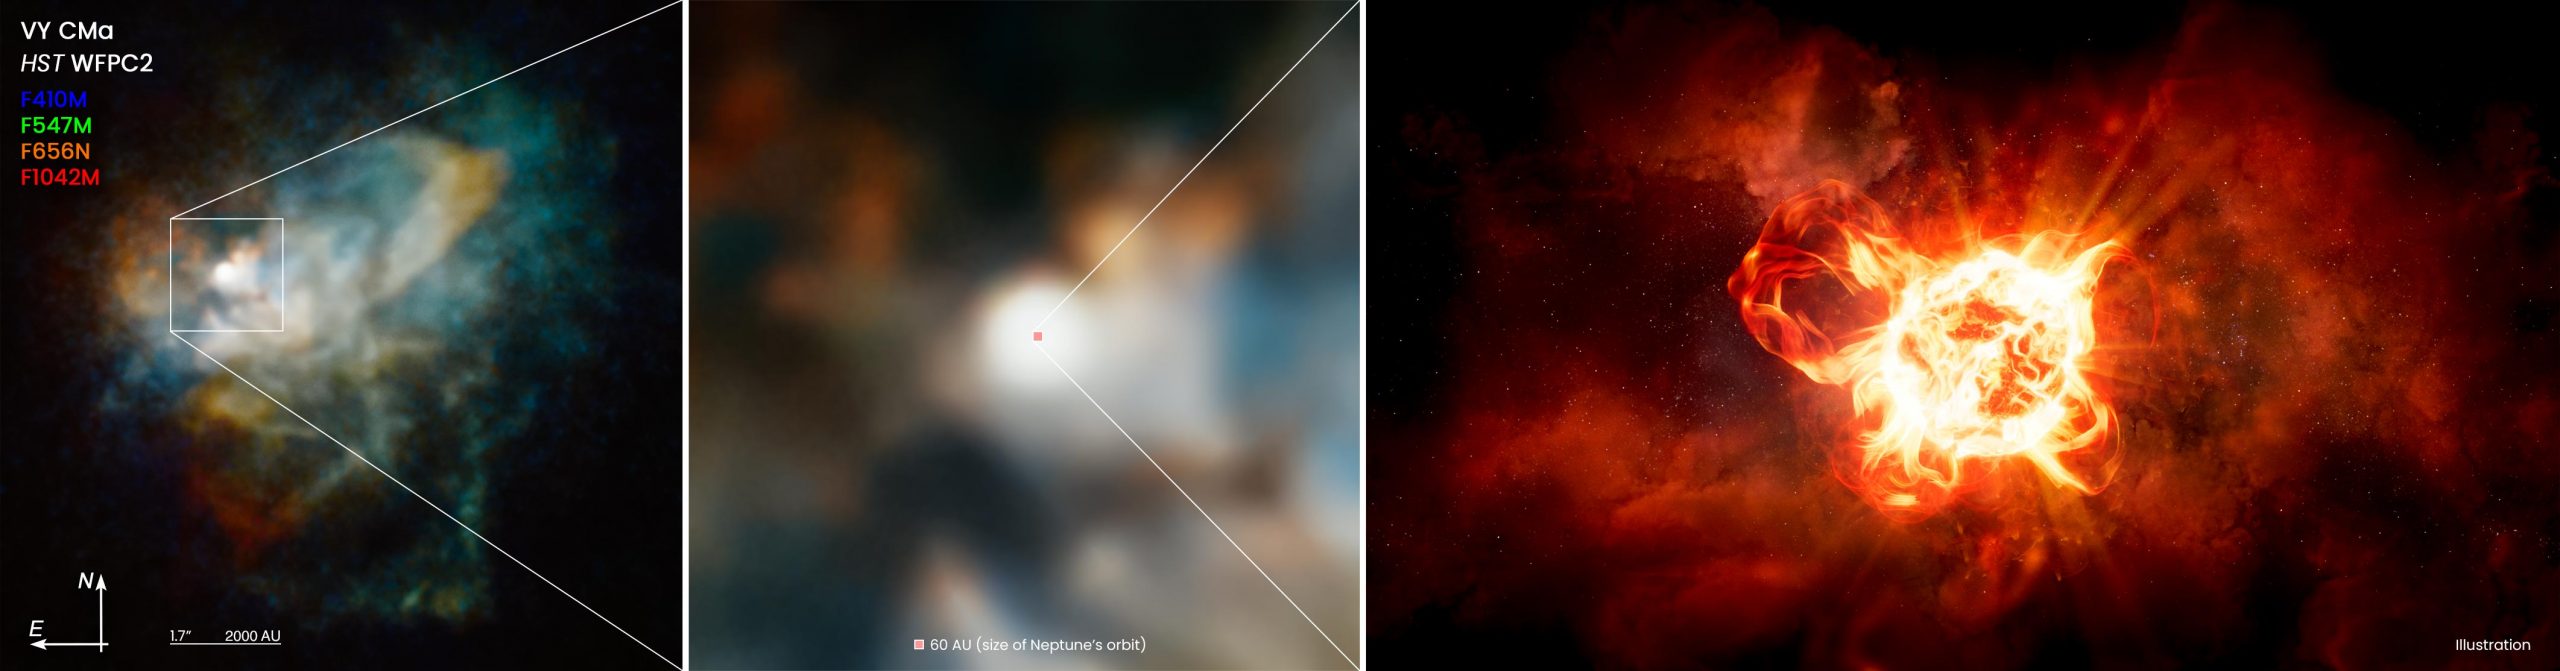 Hubble Solves Mystery of Monster Stars Dimming - Red 